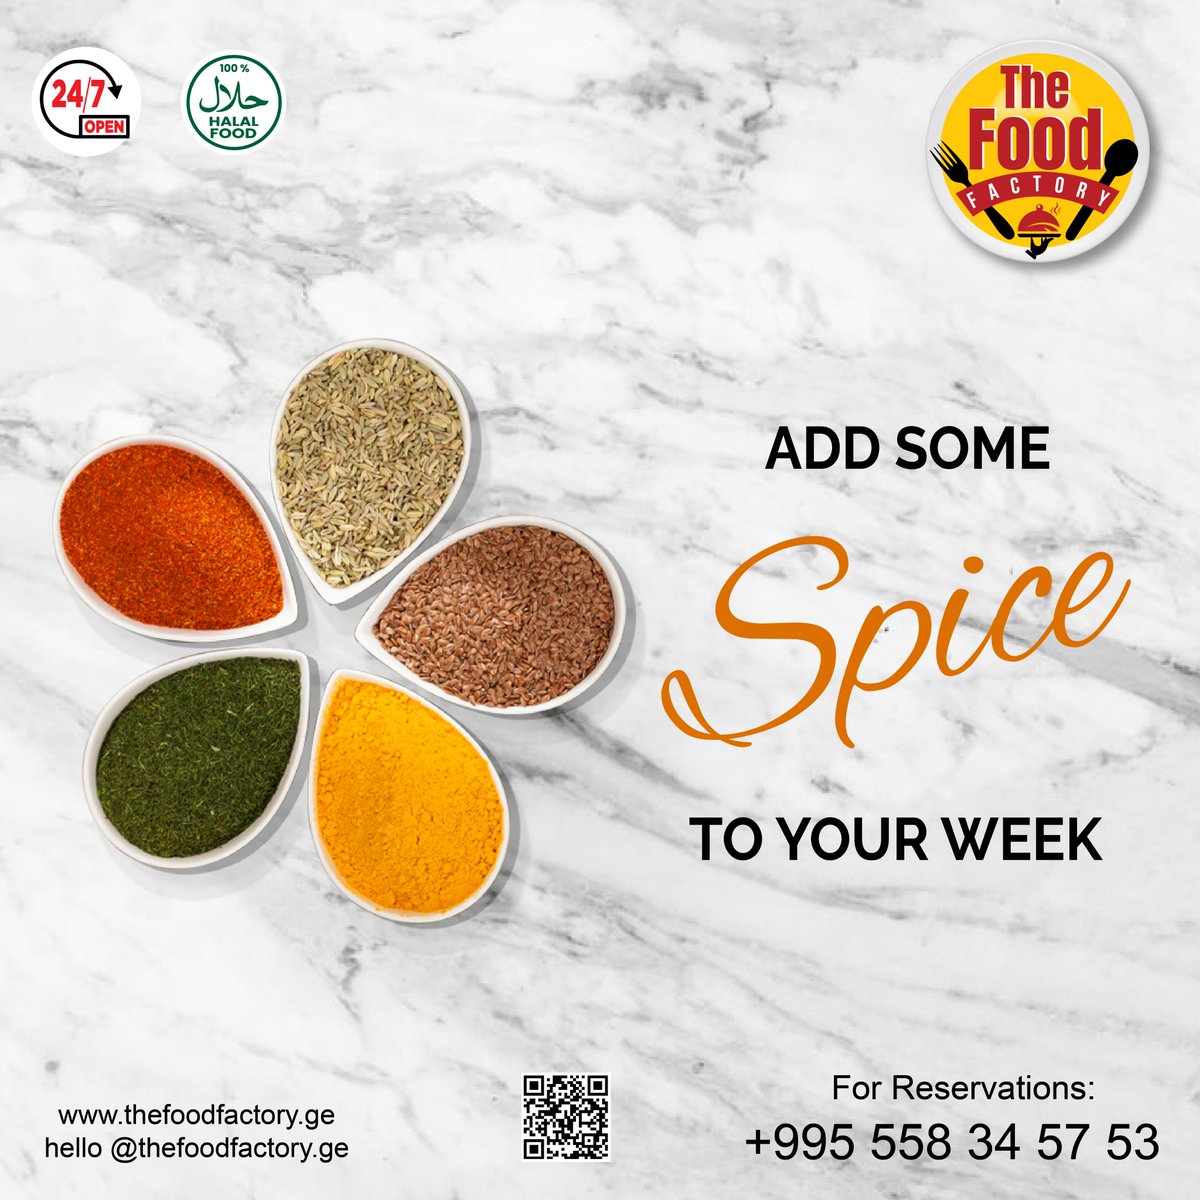 Spices and Flavors are all you need to celebrate this week!

Reserve your table: +995 558 34 57 53
Check our Menu: thefoodfactory.ge

#indianfoodlovers #indiansingeorgia #tbilisigeorgia #TheFoodFactory #georgia #deliciousfood #indiancuisine #spices #indianspices